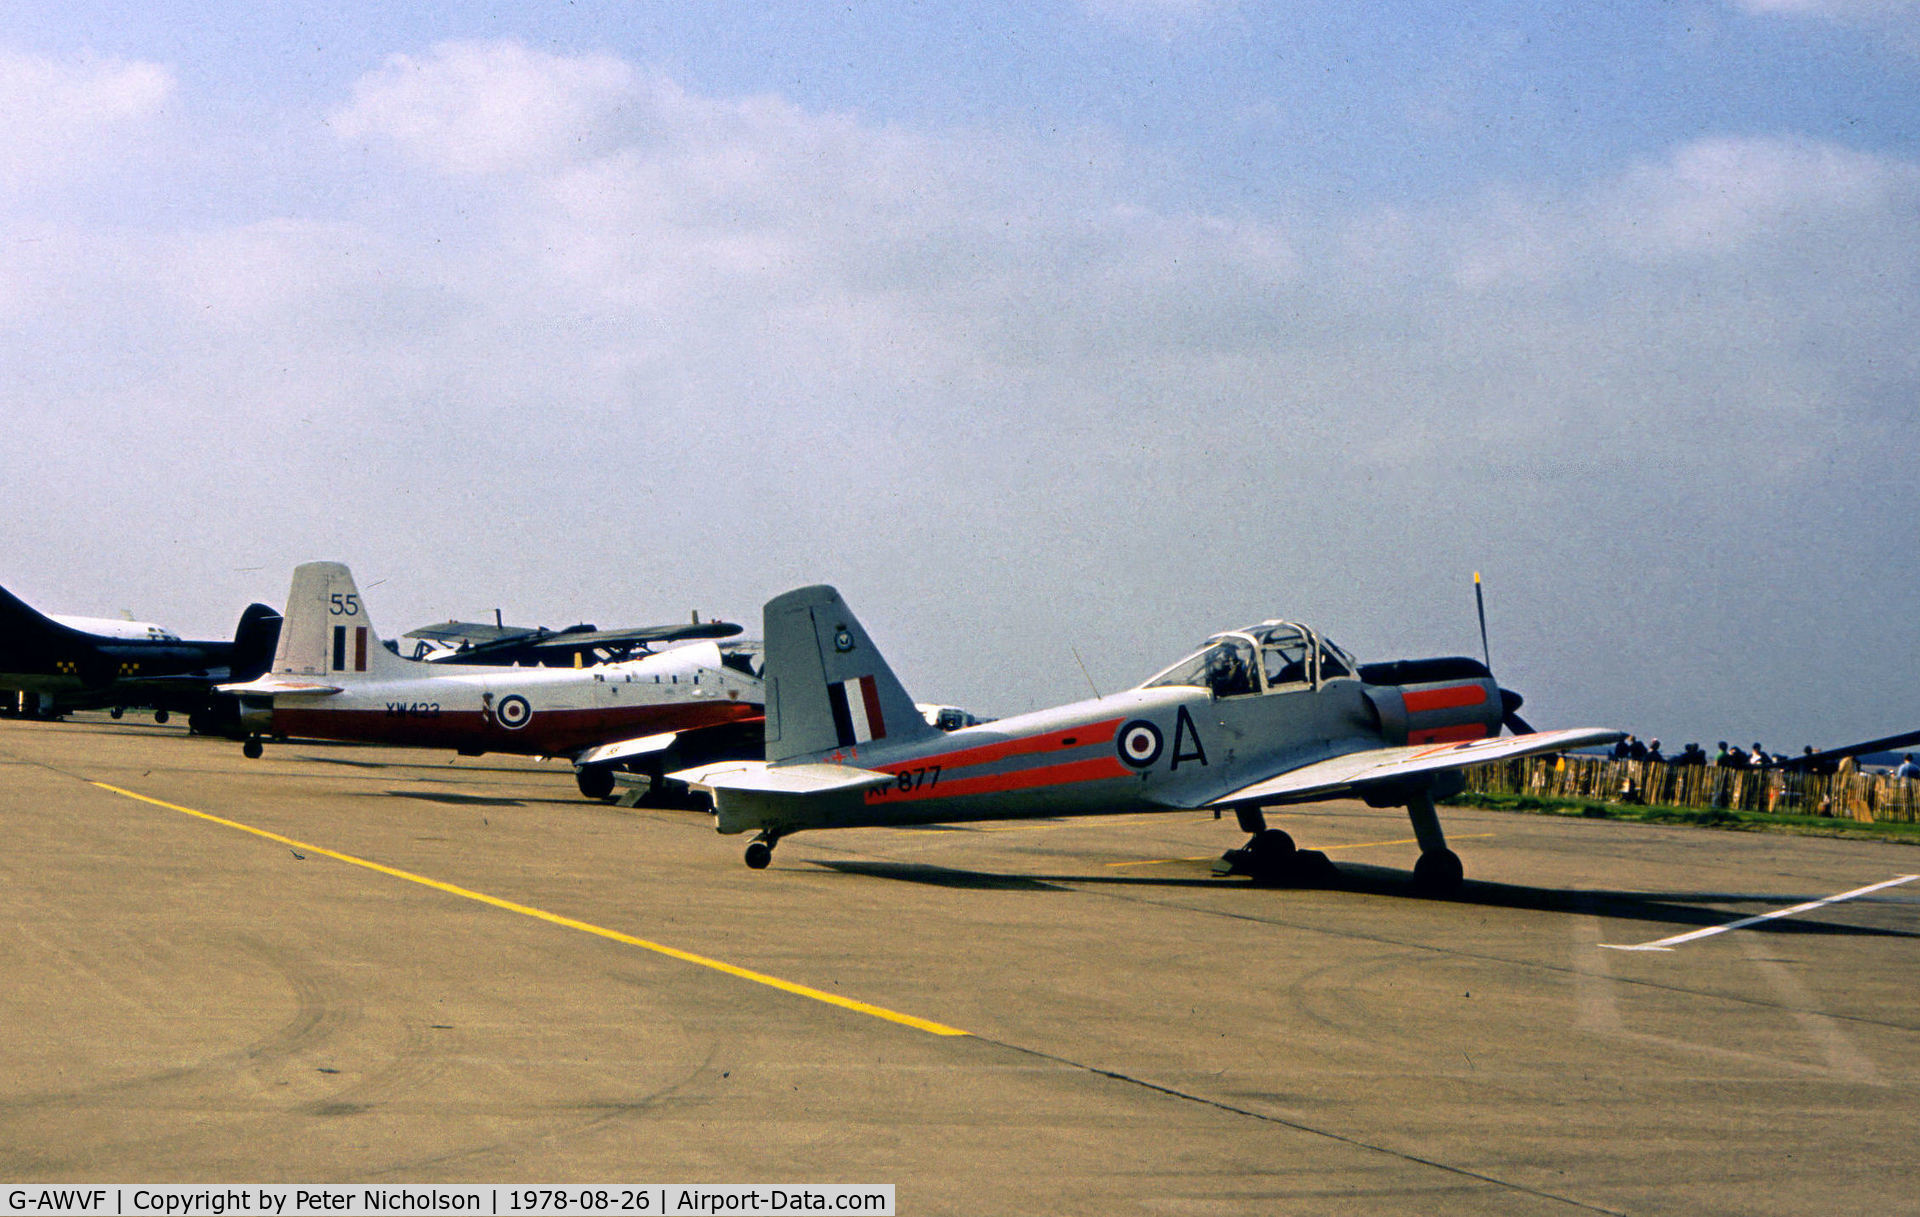 G-AWVF, 1955 Percival P-56 Provost T.1 C/N PAC/F/375, Provost T.1 as G-AWVF on display at the 1978 RAF Binbrook Airshow.